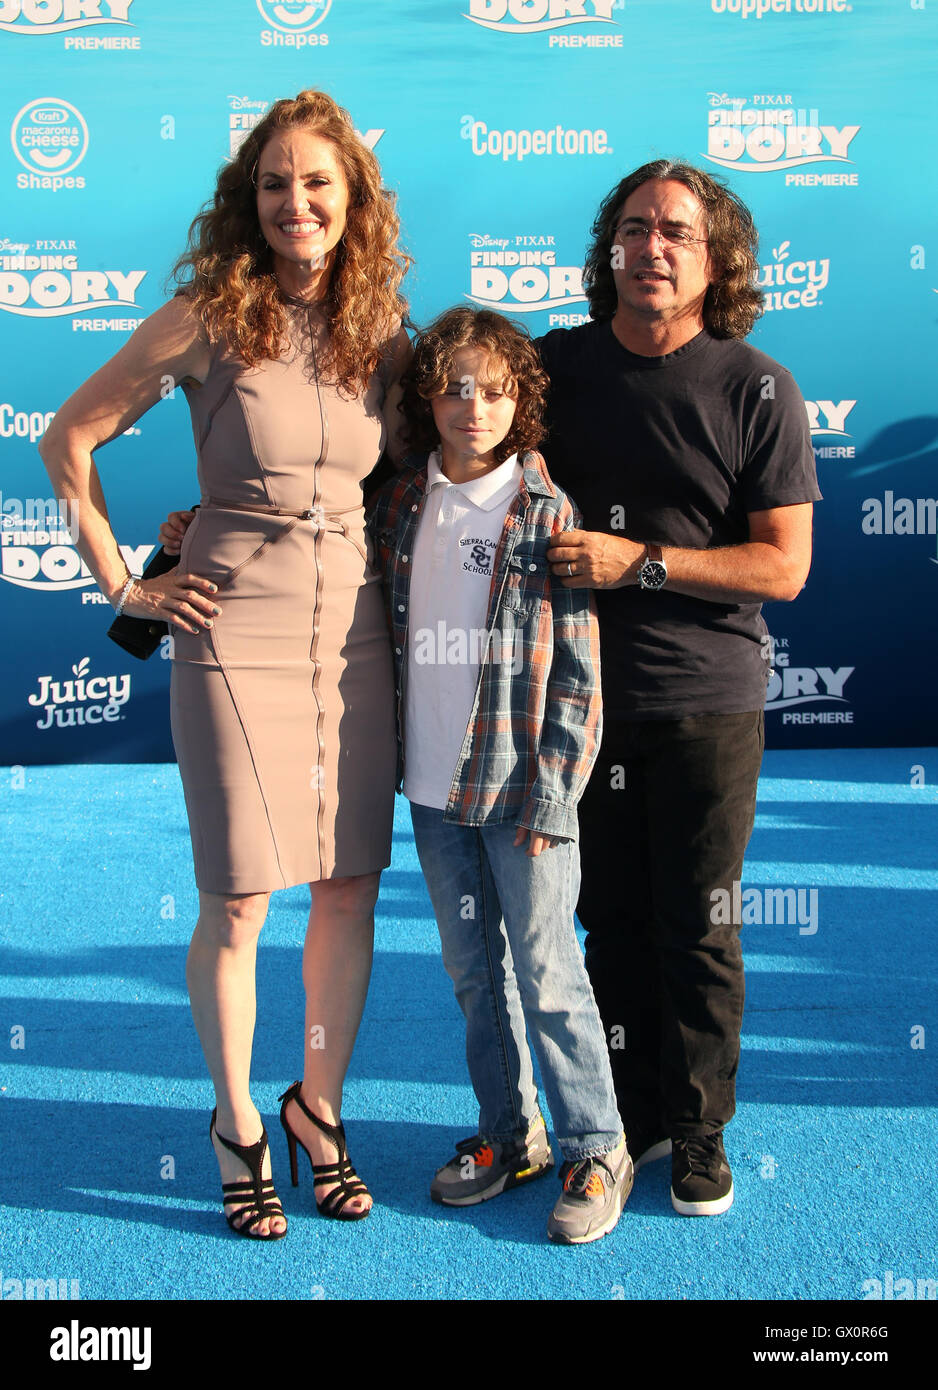 World premiere of Disney-Pixar's 'Finding Dory' at the El Capitan Theatre - Arrivals  Featuring: Amy Brenneman, Brad Silberling, Bodhi Russell Silberling Where: Hollywood, California, United States When: 08 Jun 2016 Stock Photo